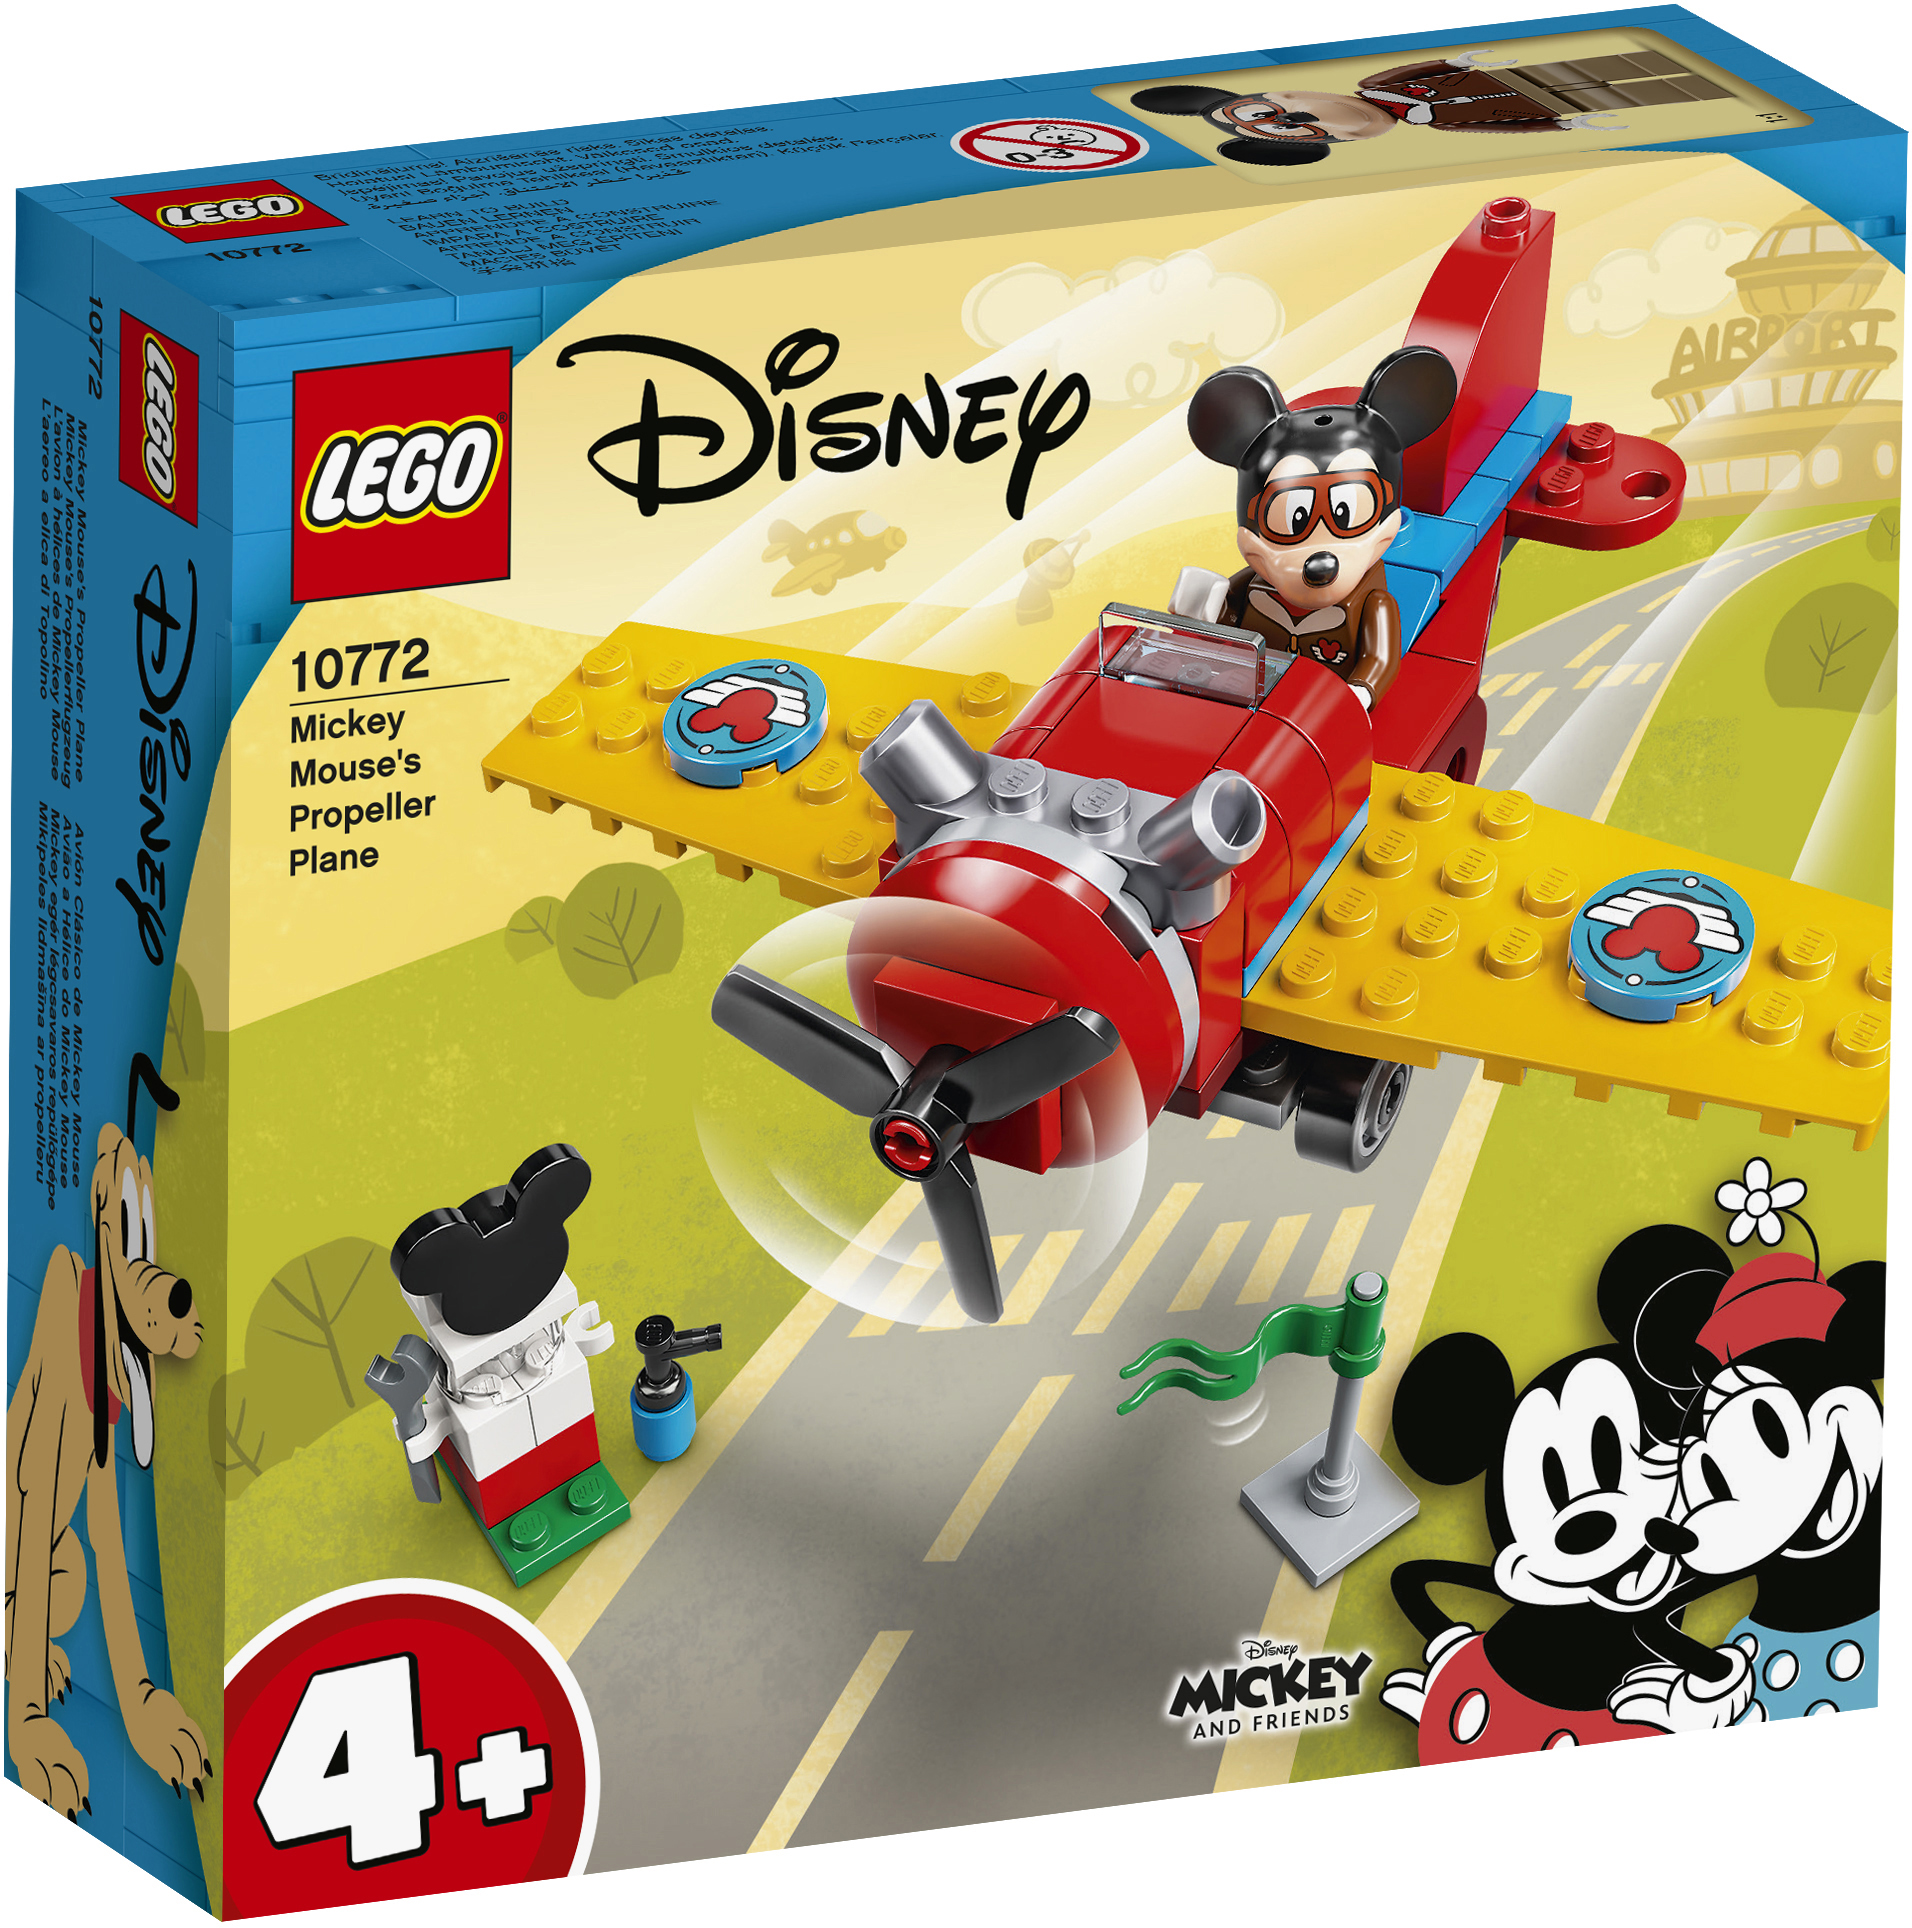 LEGO® Mickey and Friends, Mickey Mouse's Propellerflugzeug 10772, 59 Teile, Alter: 4+